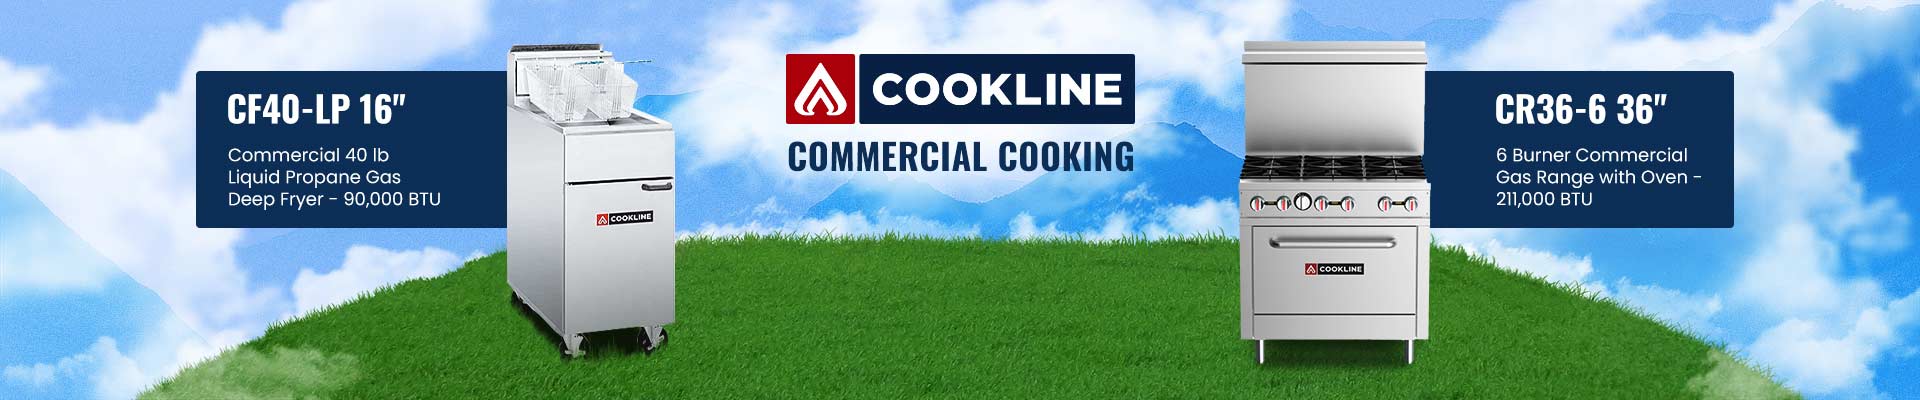 Cookline Gas Commercial Ranges and Fryers